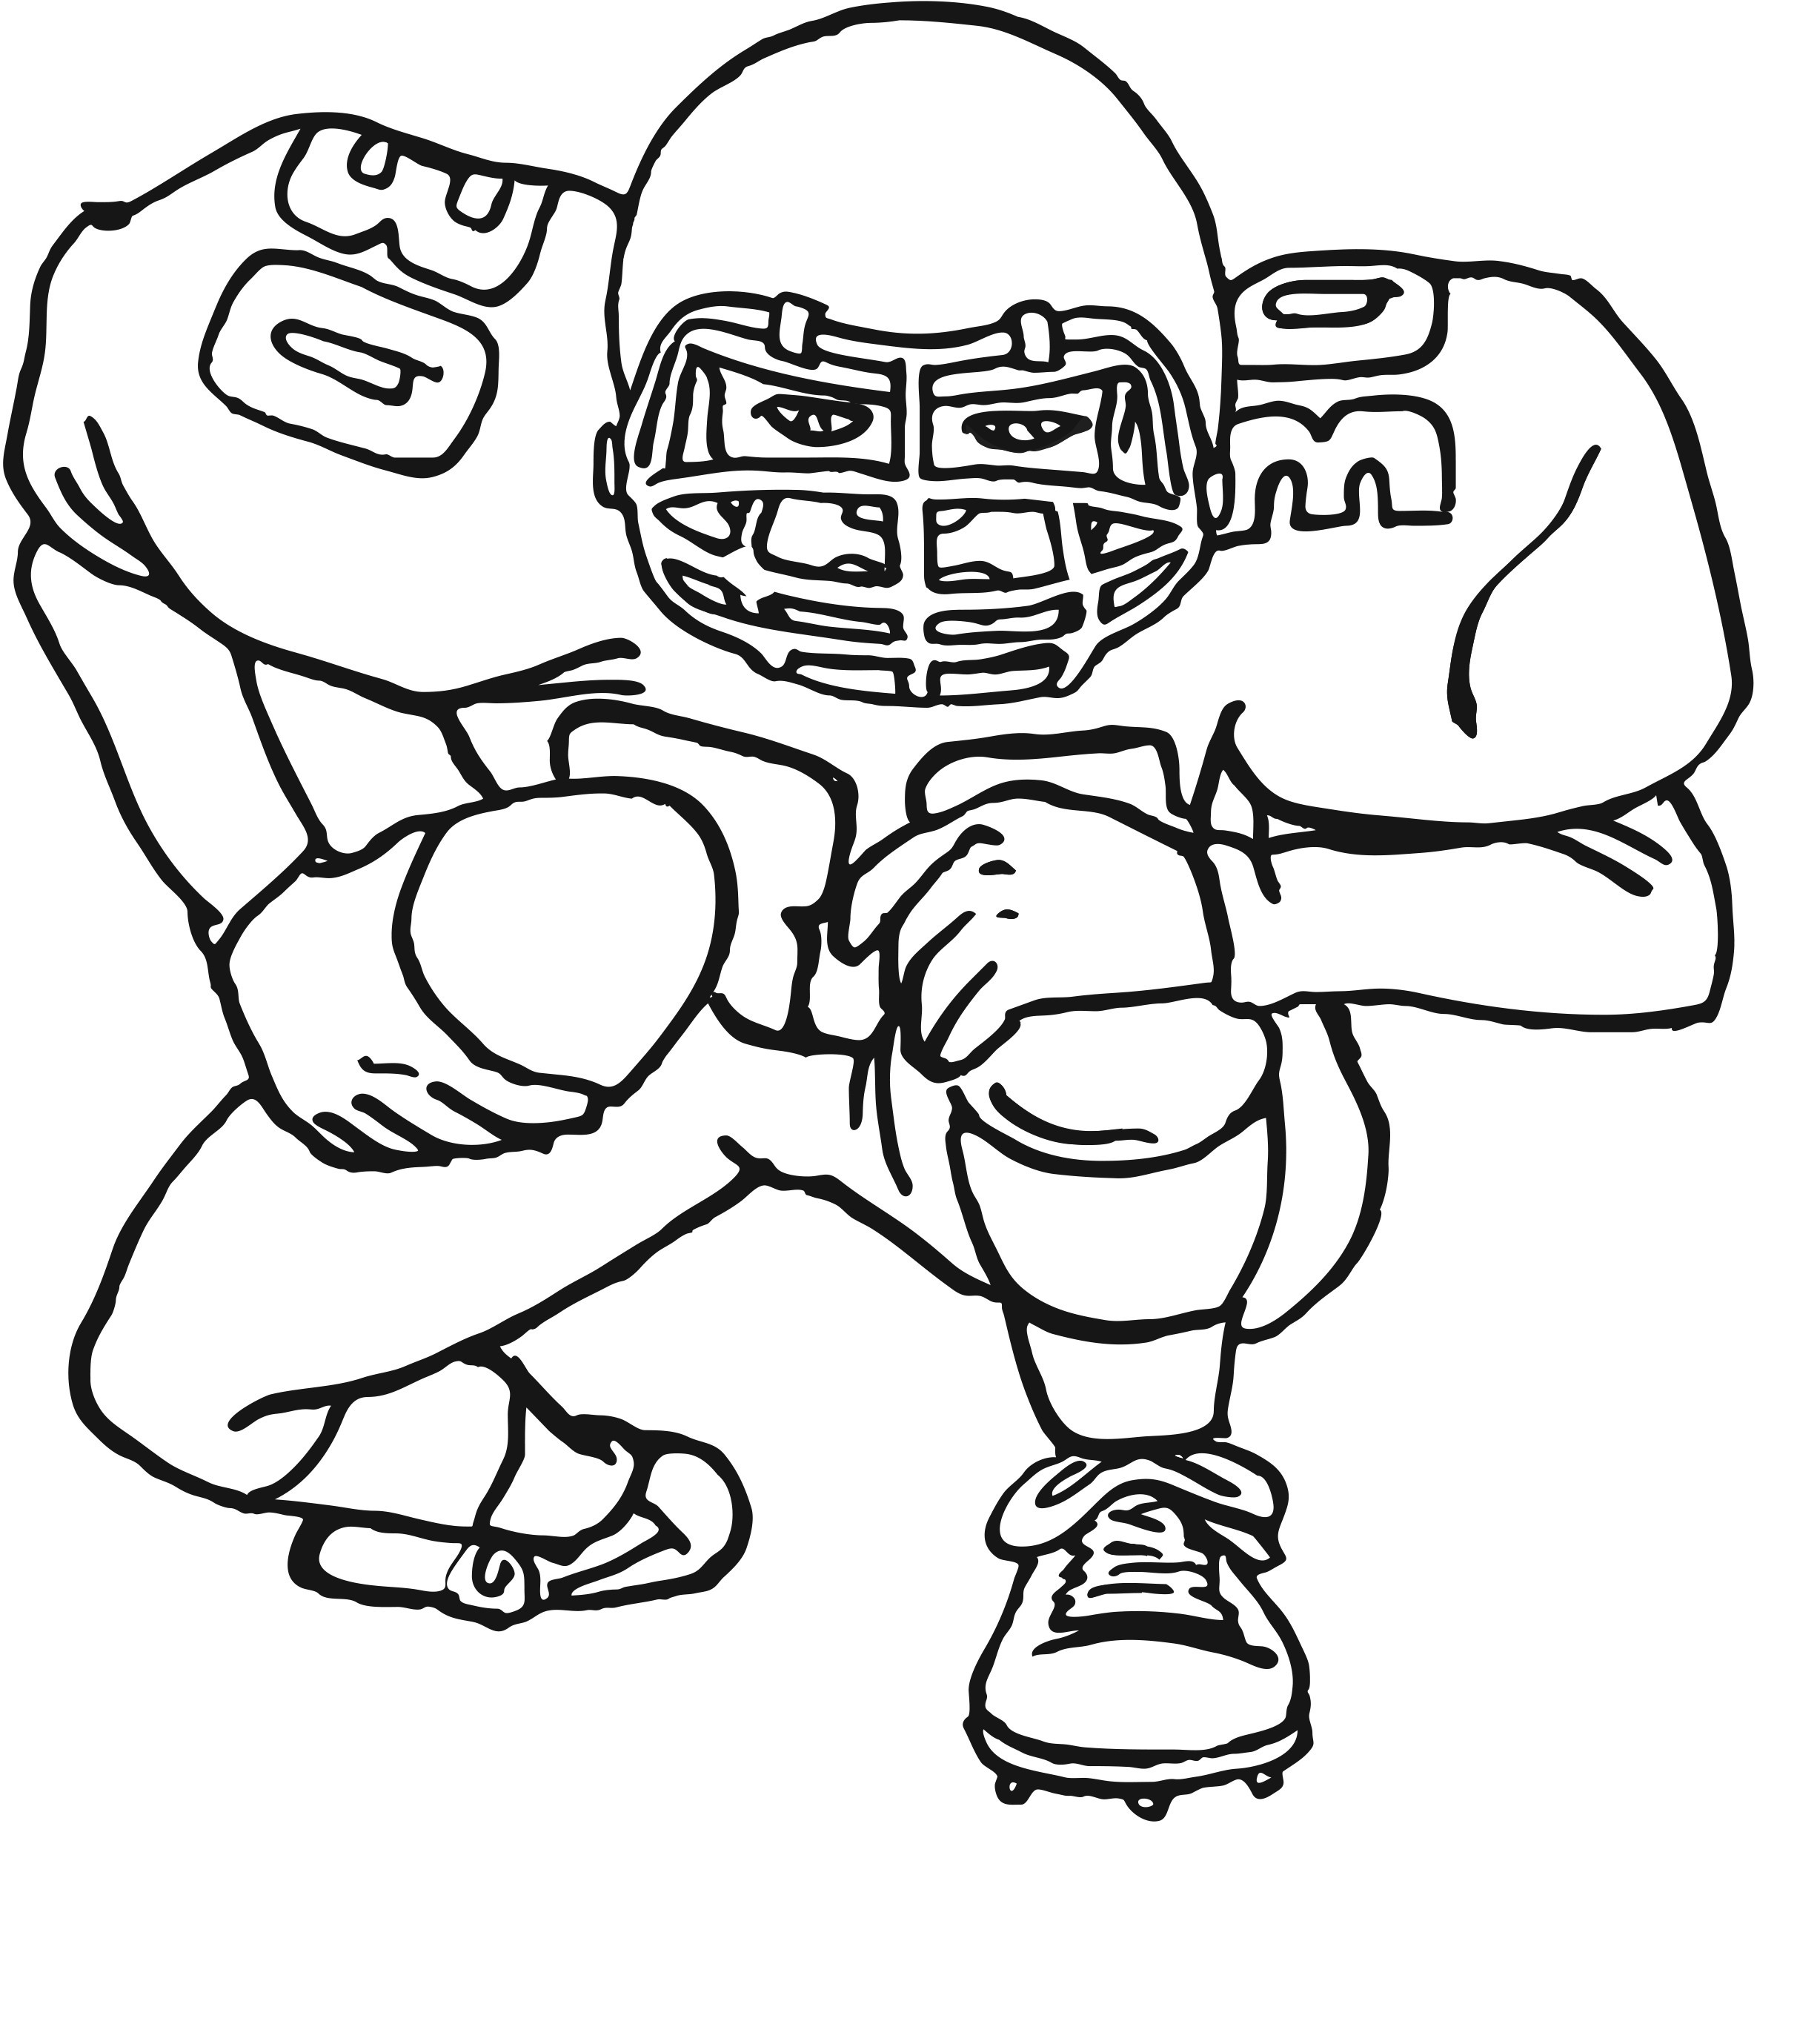 Jets Football Coloring Pages at GetColorings.com | Free printable